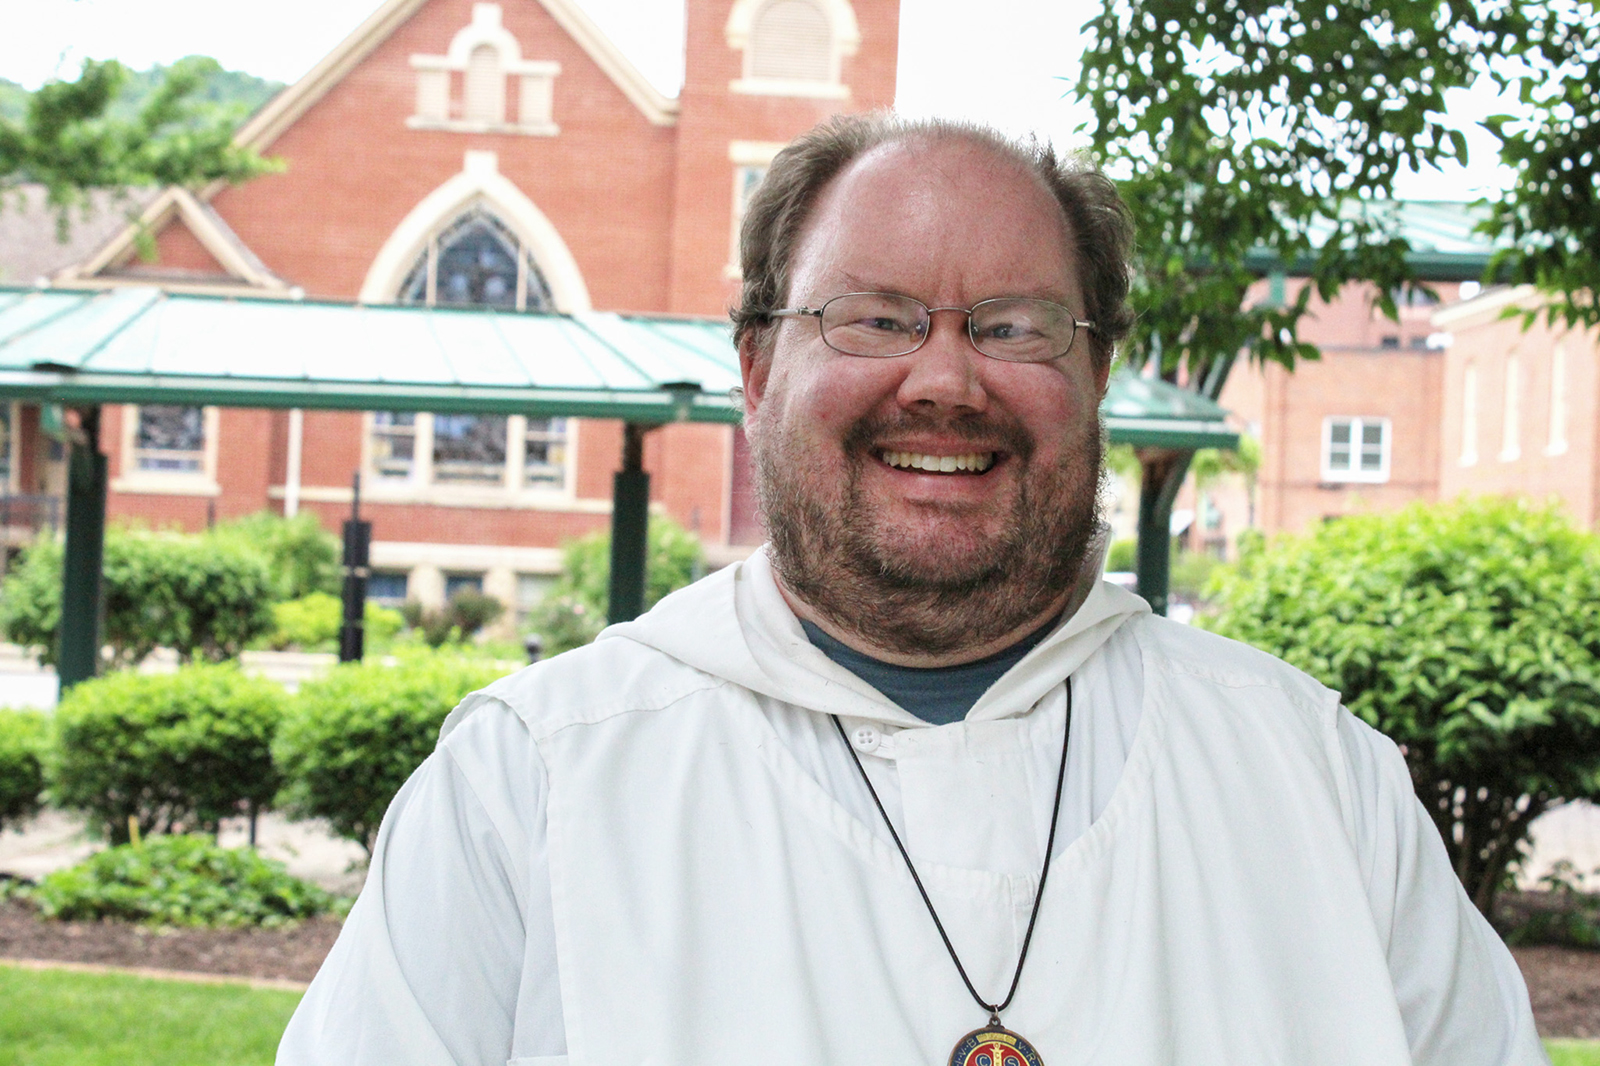 Catholic solitary monastic approved by Kentucky bishop comes out as transgender